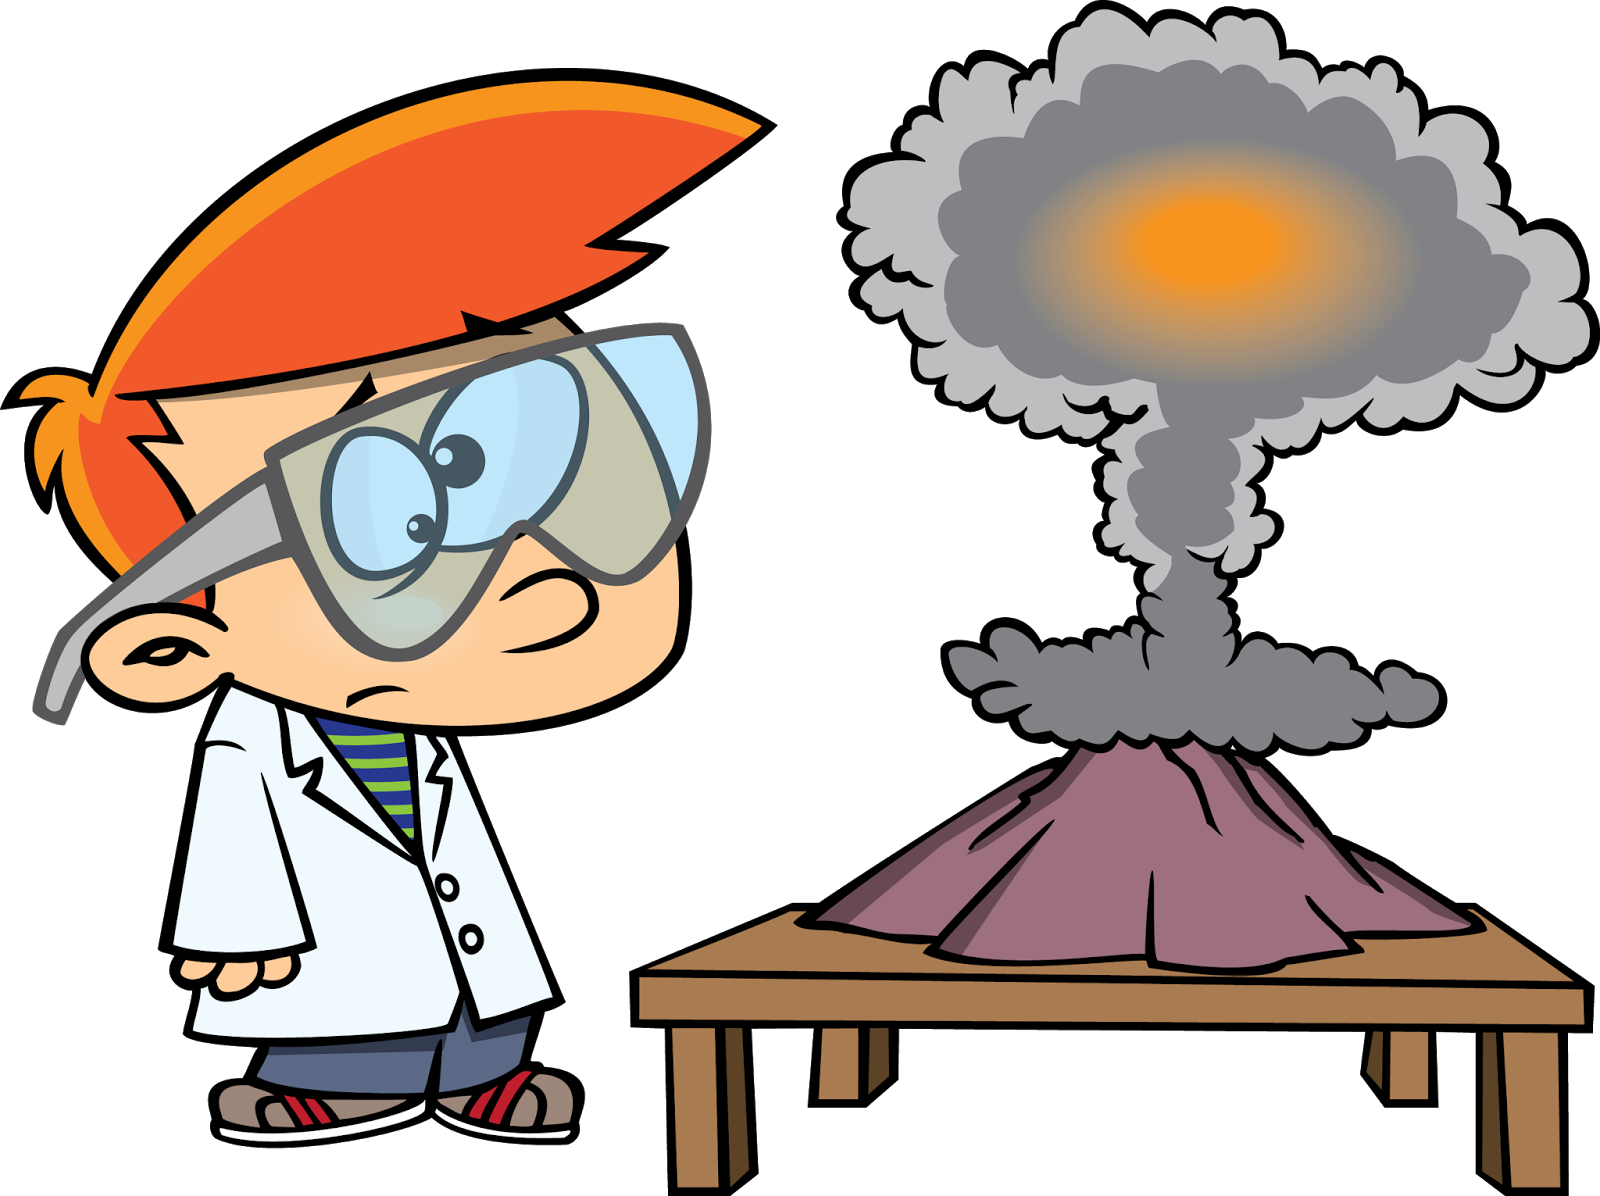 clipart science science classroom